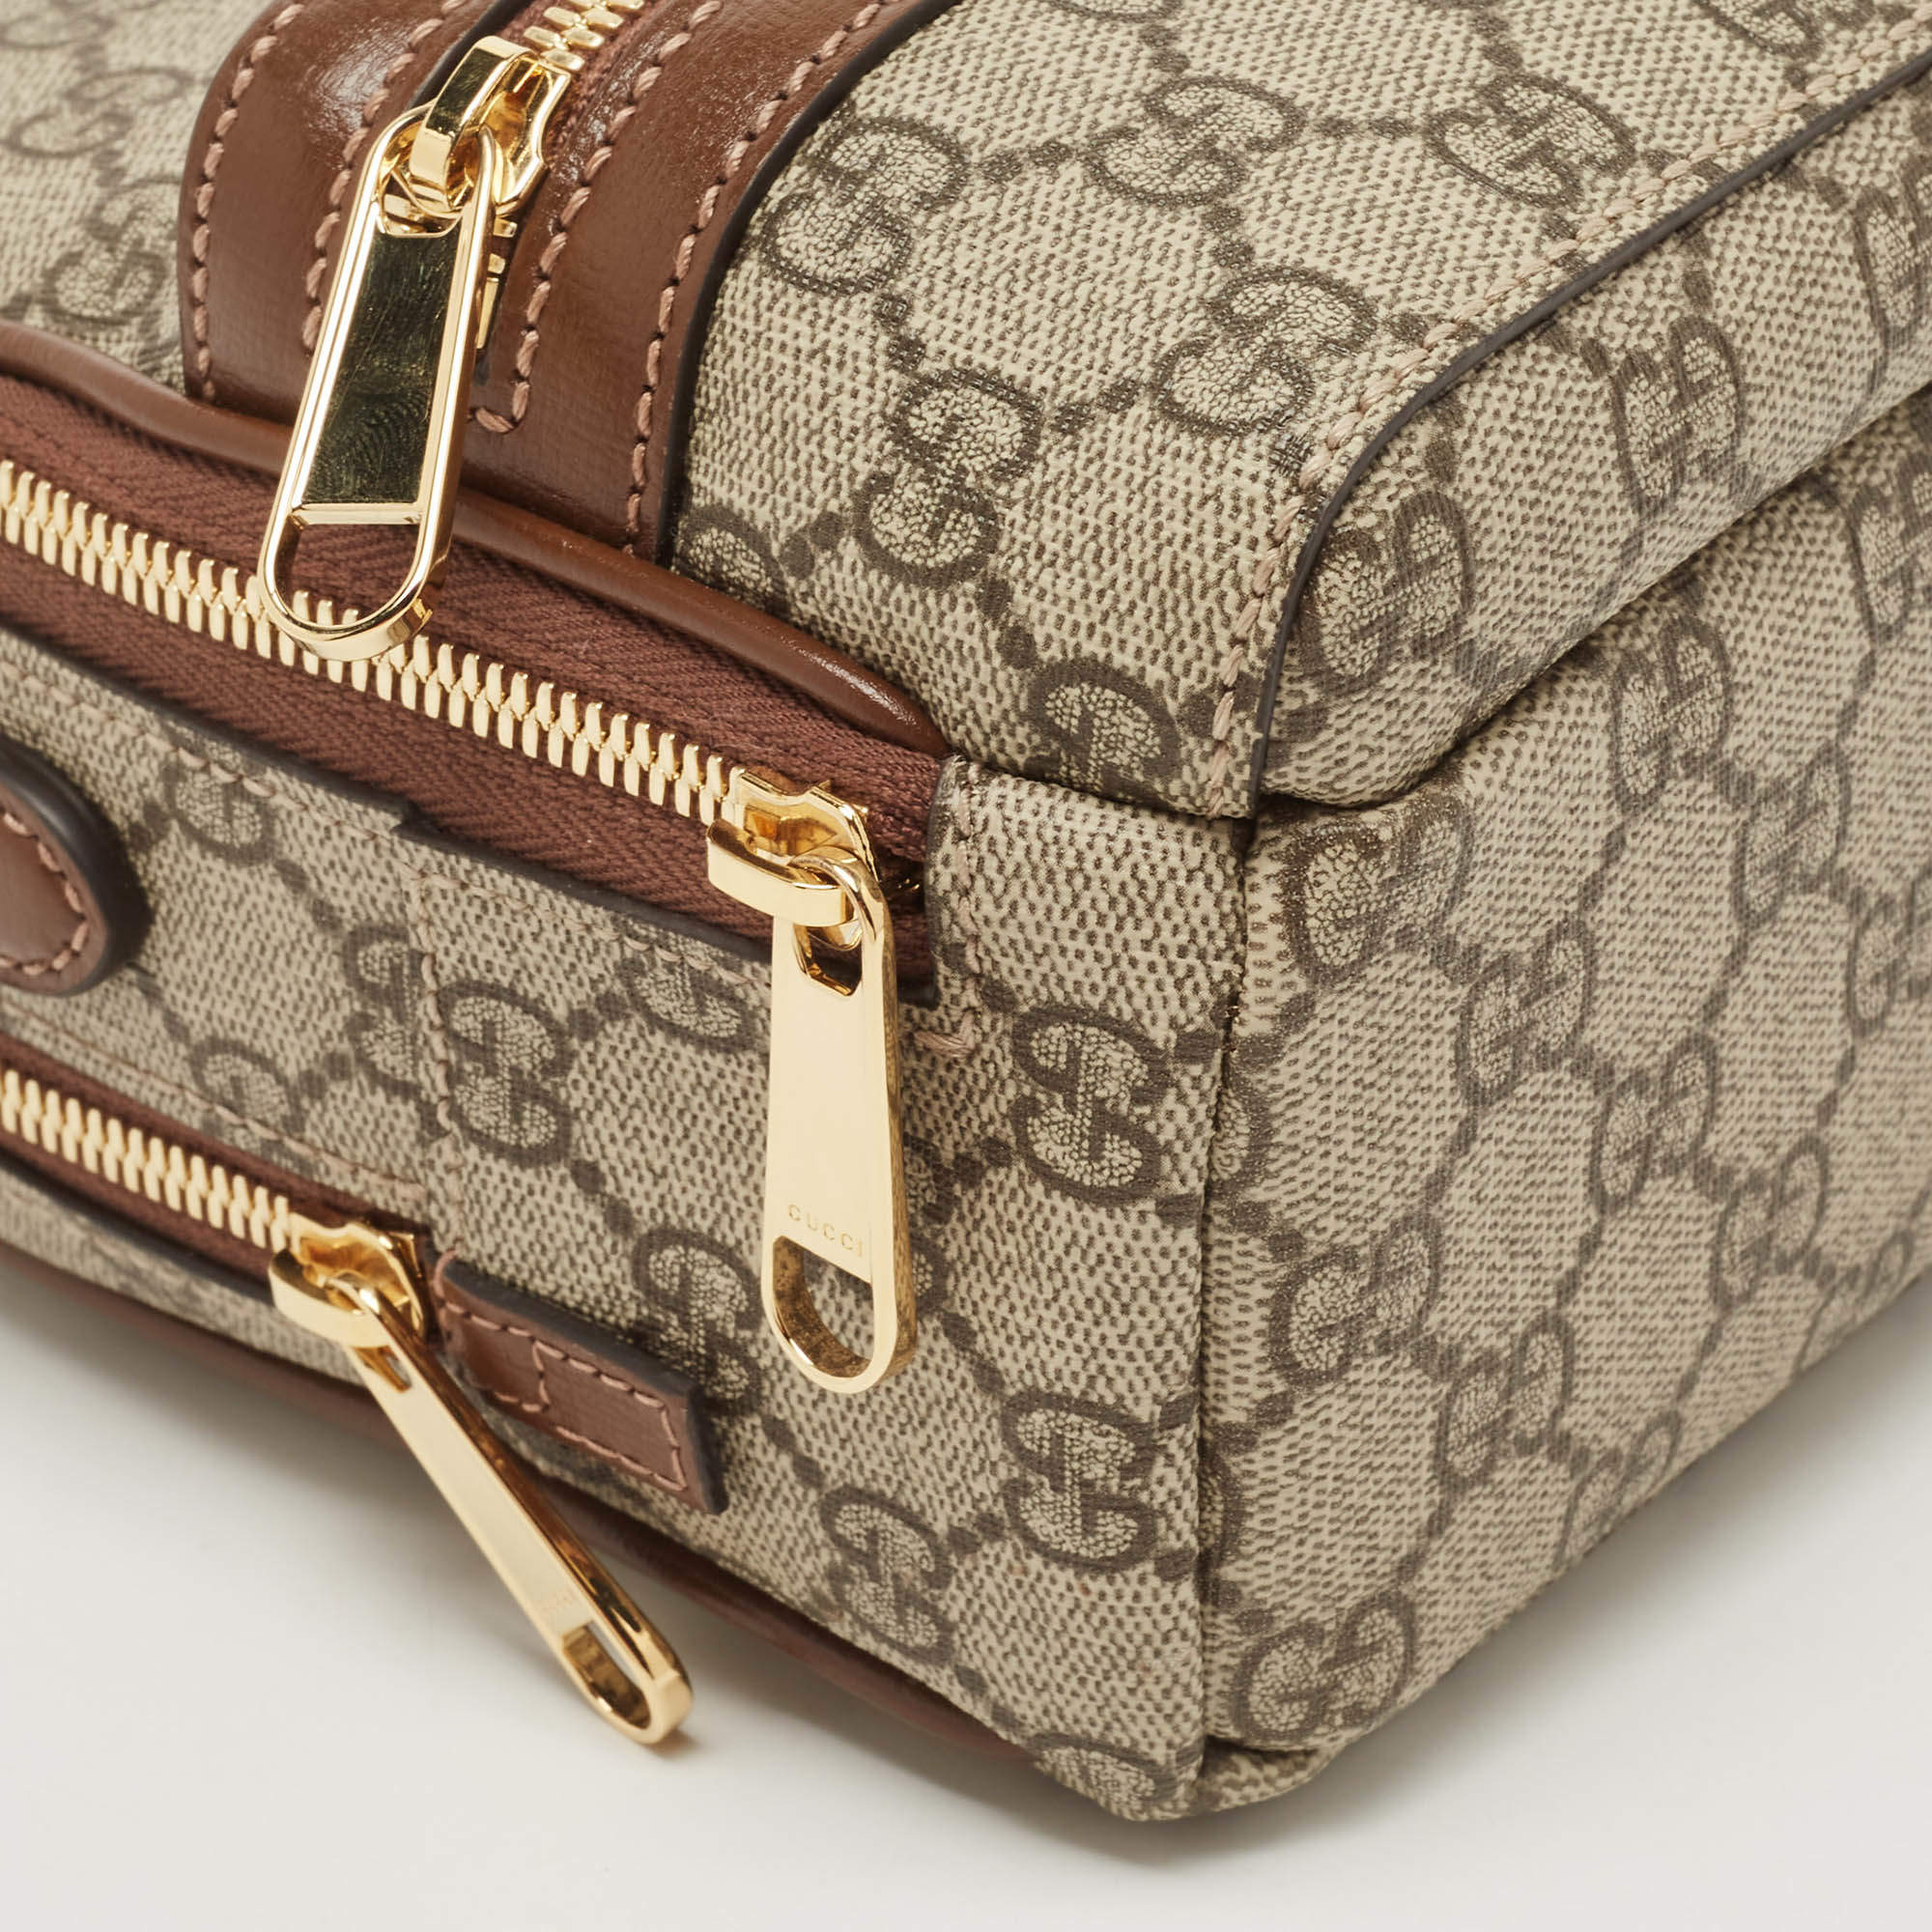 Multi-function bag with Interlocking G in beige and ebony Supreme